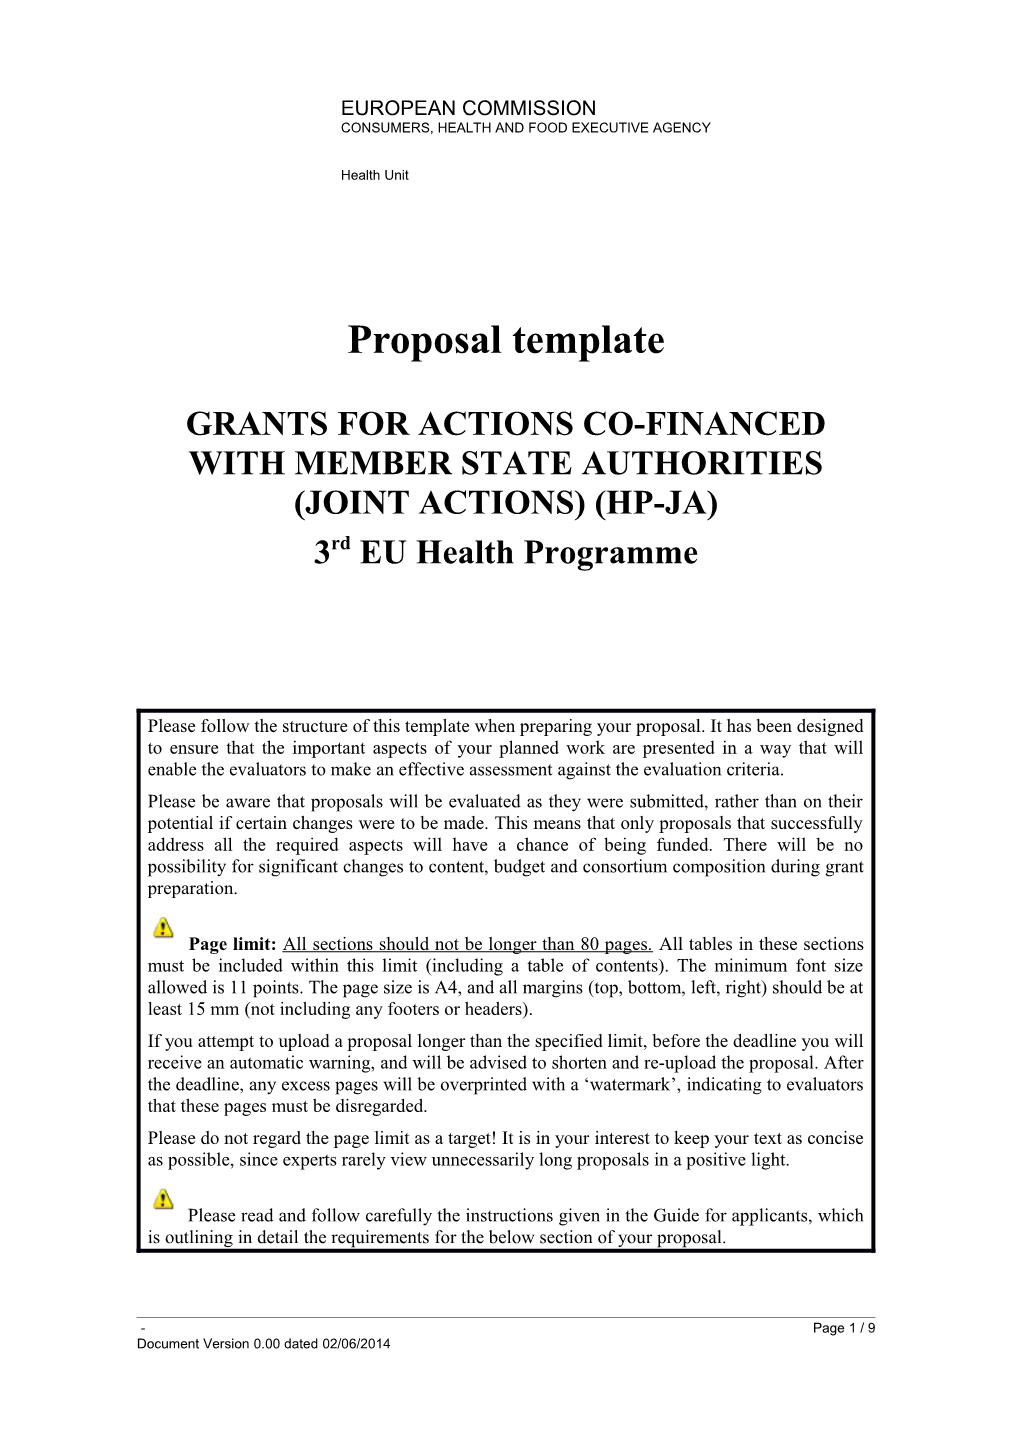 Grants for Actions Co-Financed with Member State Authorities (Joint Actions) (Hp-Ja)